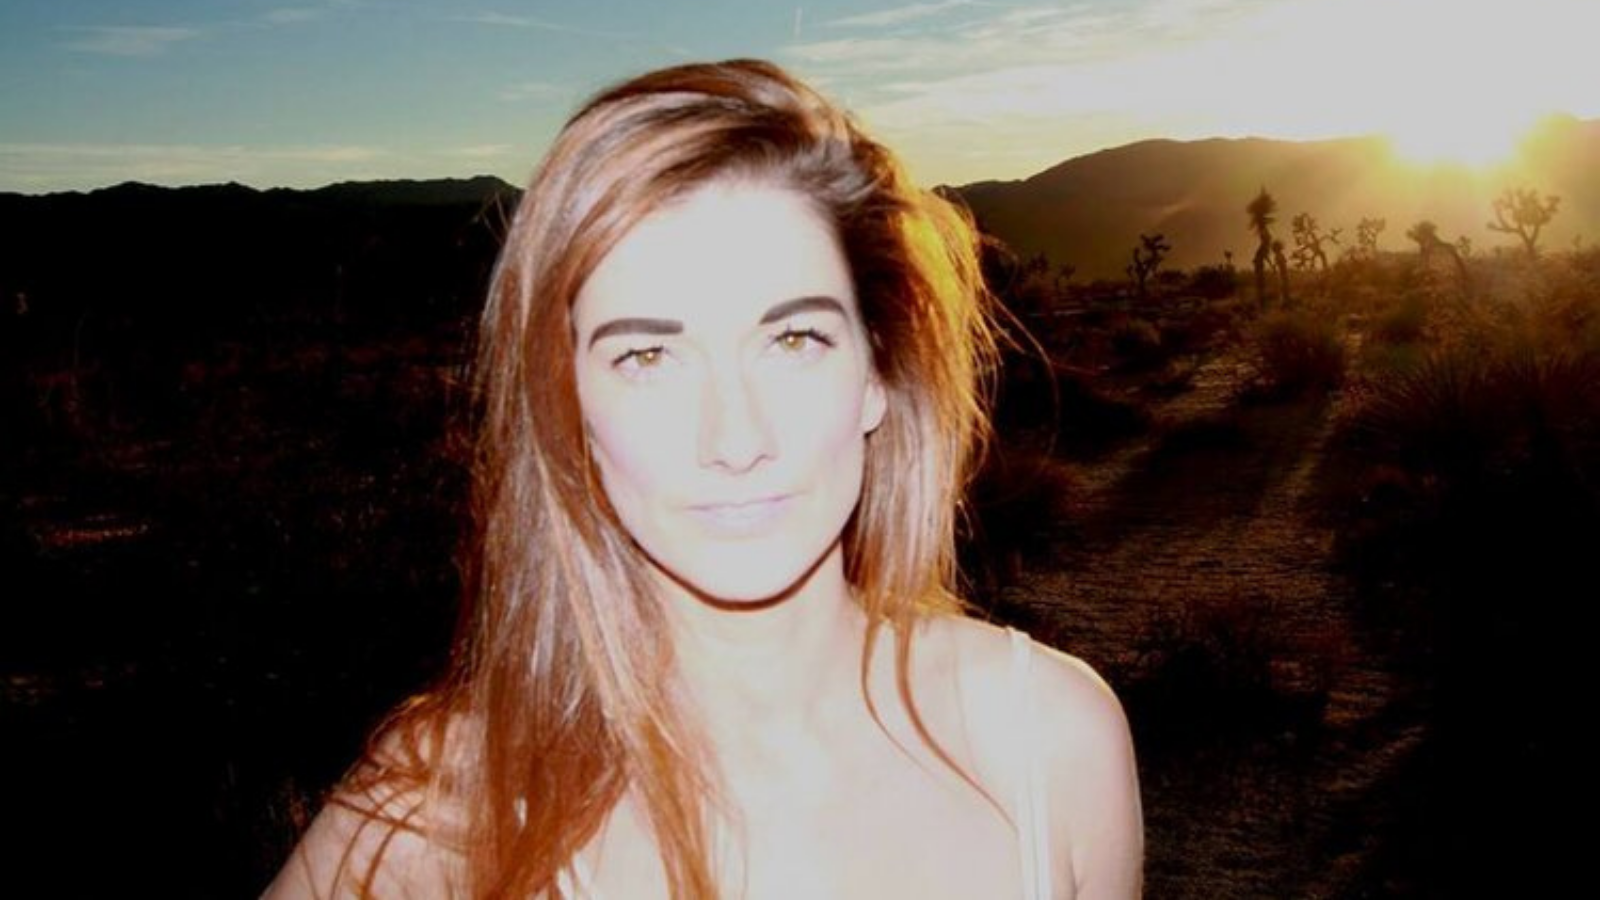 A woman with long reddish brown hair is pictured in bright white light. Behind her the sun peeks out over some hills. This is screen practitioner Mairi Claire Bowser.